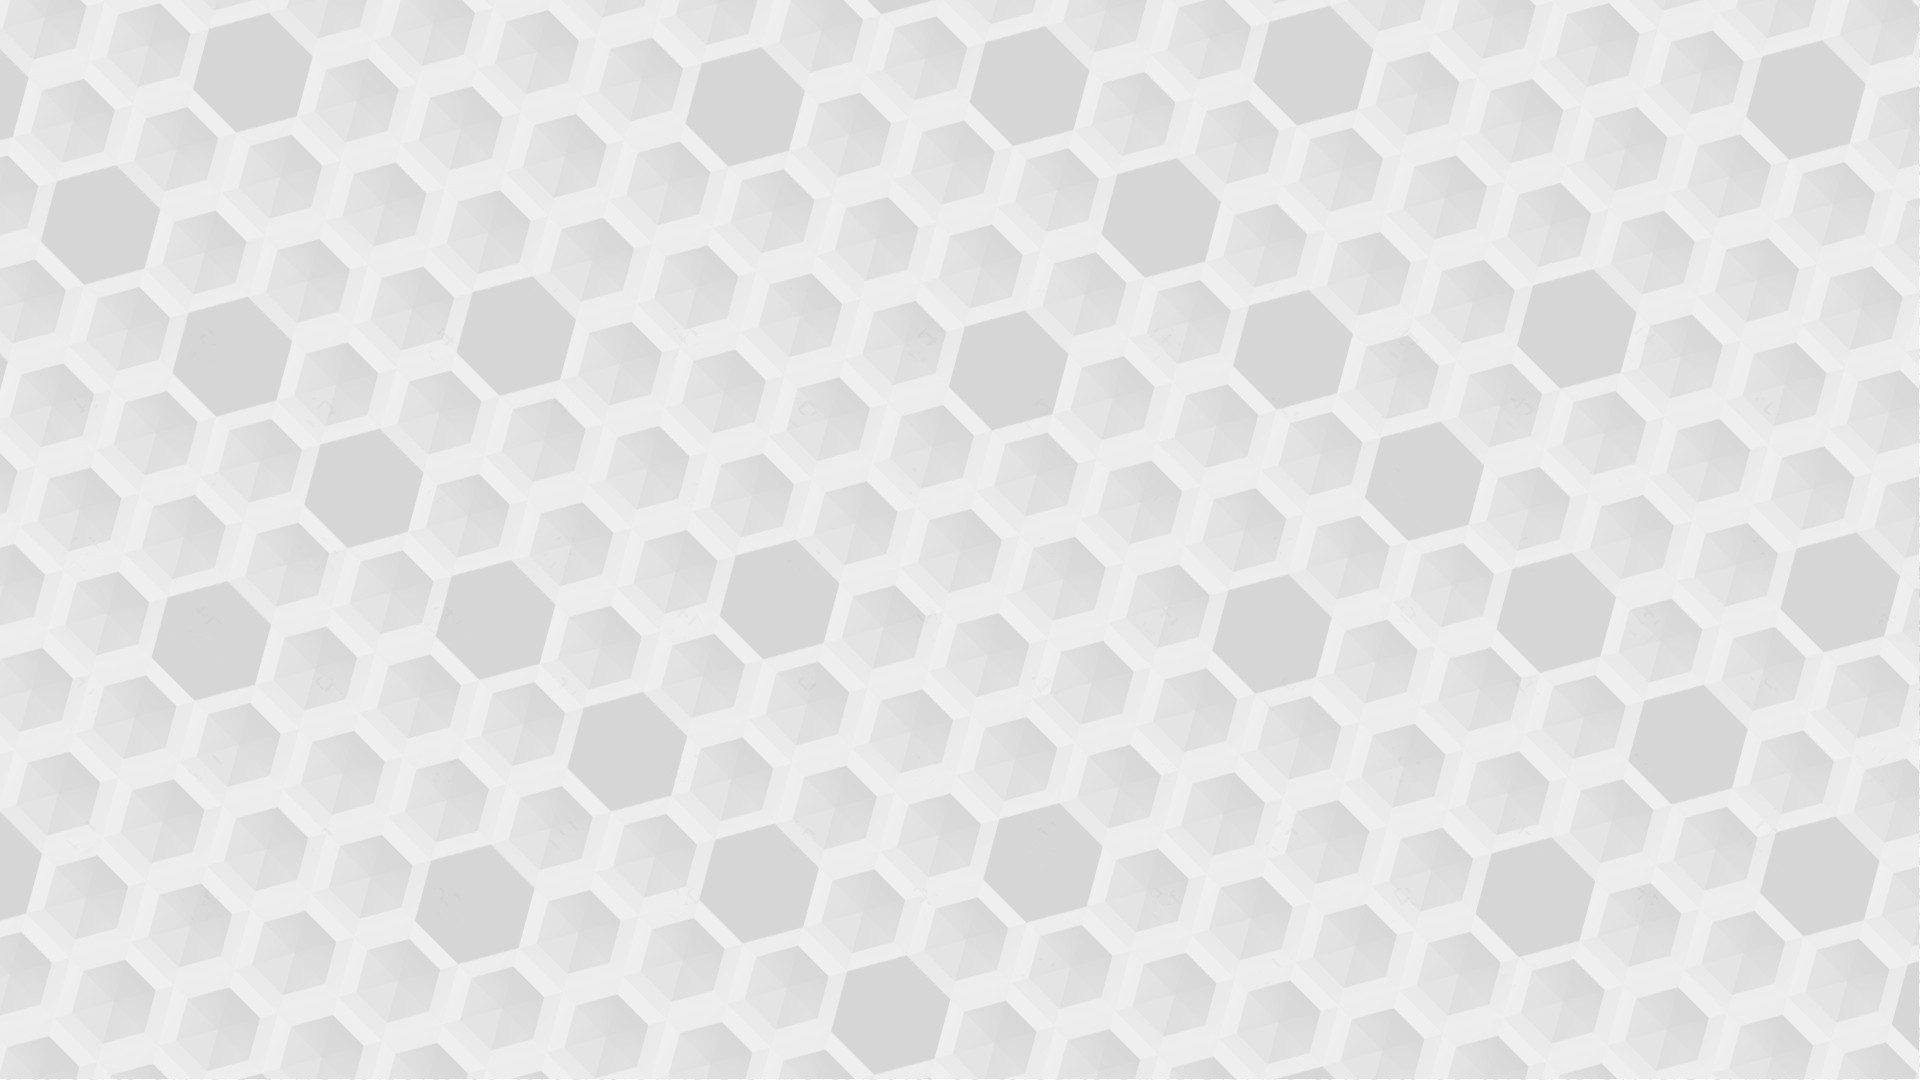 hive, Honeycombs, Hexagon, Bright, White, Simple Wallpaper HD / Desktop and Mobile Background